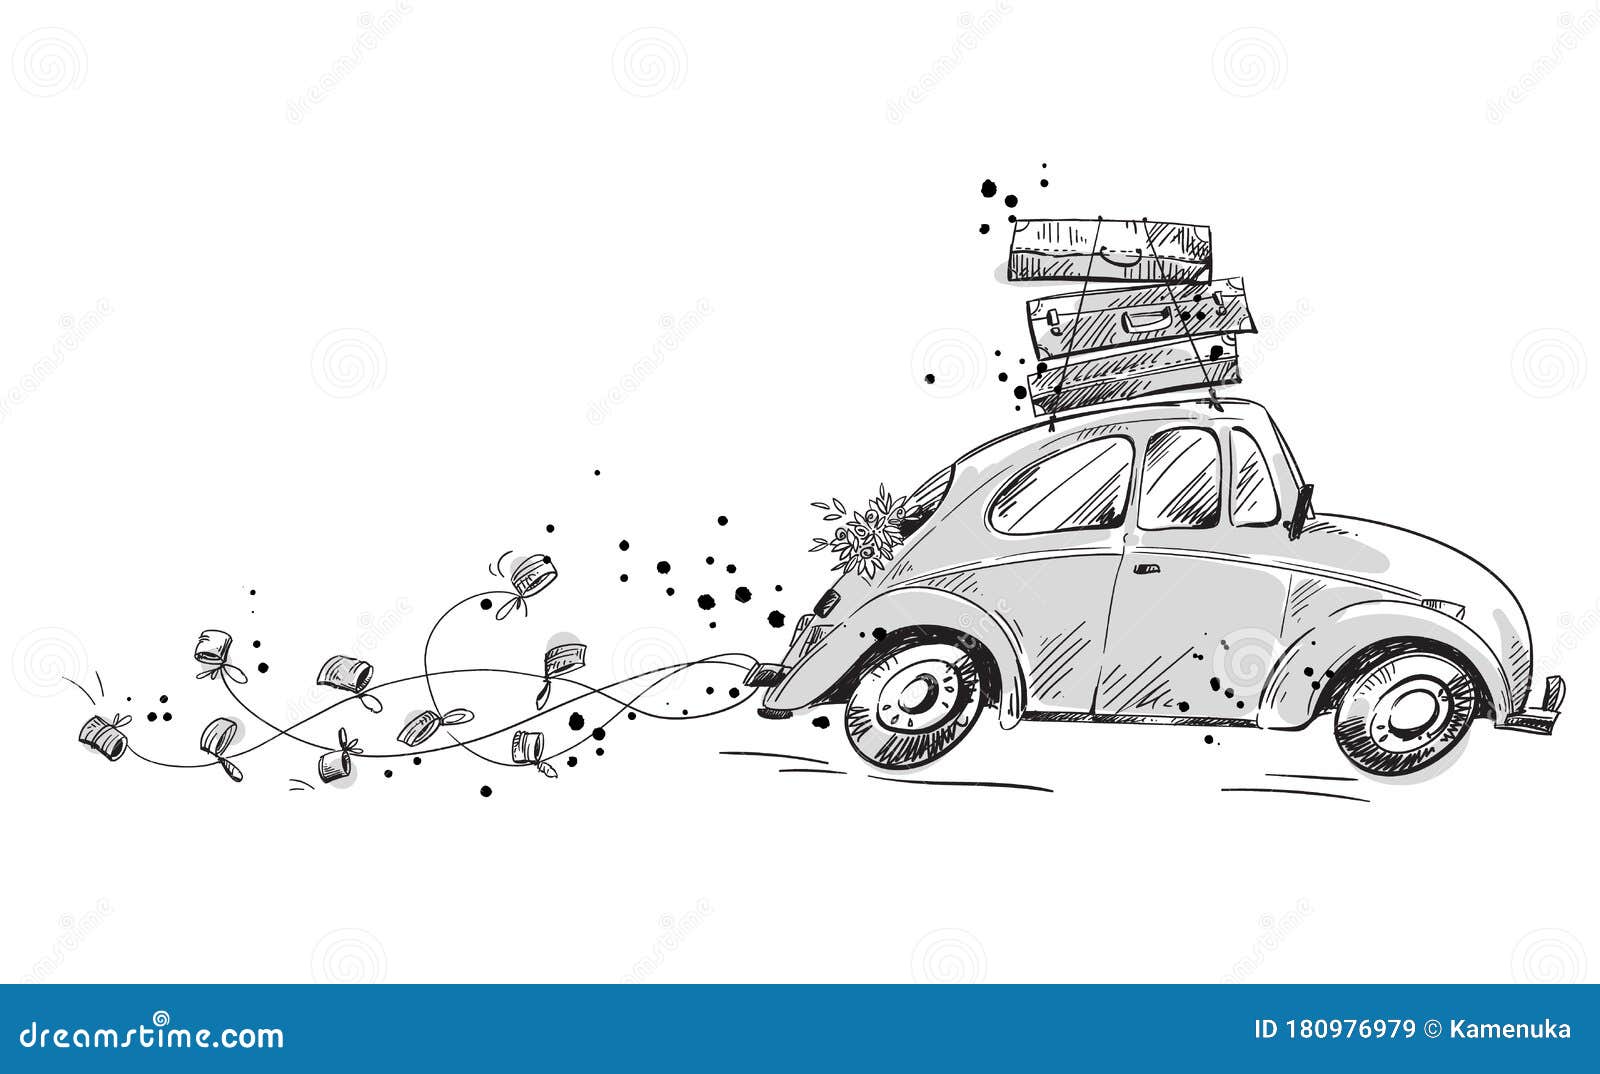 Car with wedding decorations and packed with suitcases going on a honeymoon, vector illustration.